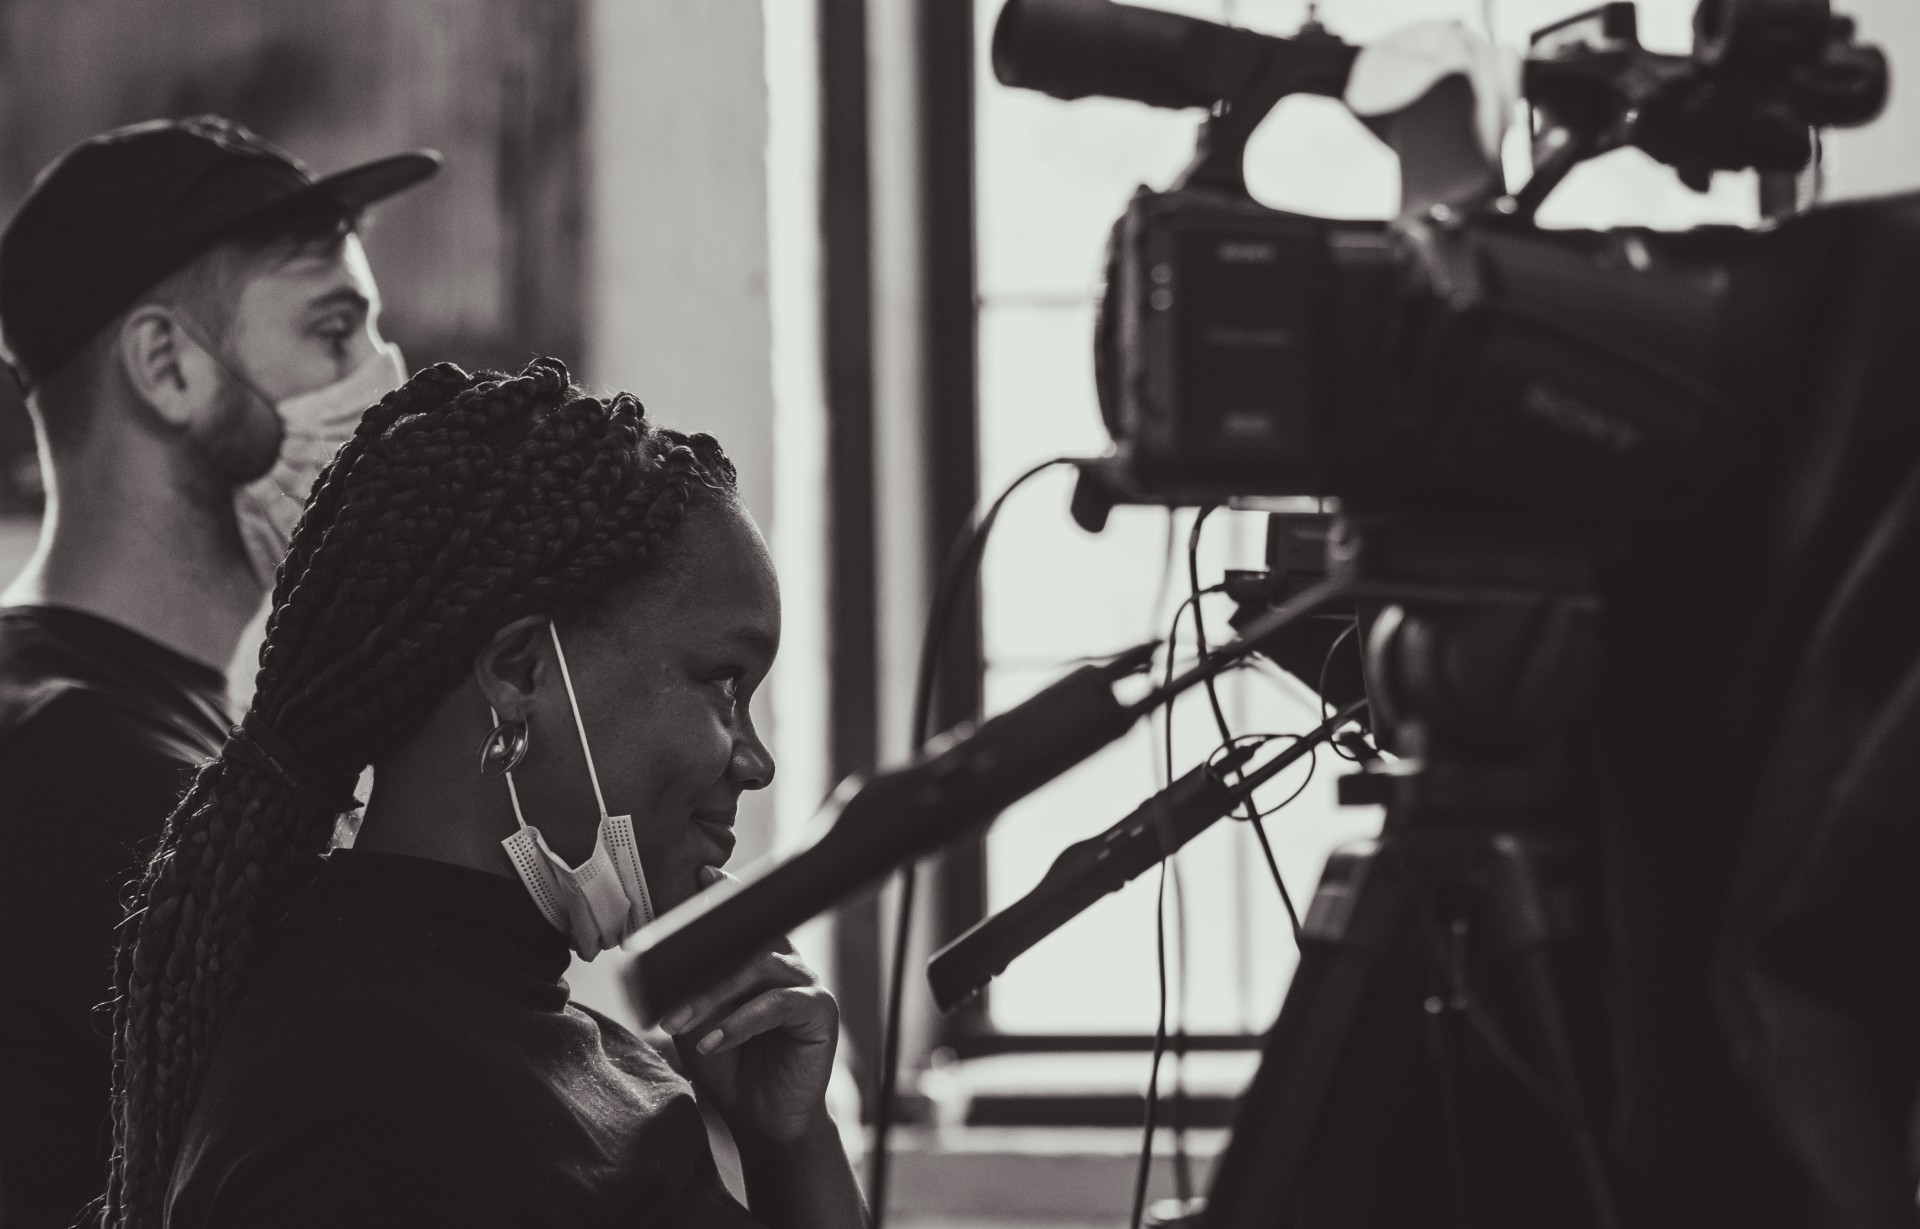 Two people stand behind a camera, looking on at a scene they are presumably recording. They both wear face masks though the person in front, who is Black, has pulled their face mask down to smile at what they are looking at to the right off-screen. The photo is in black and white.